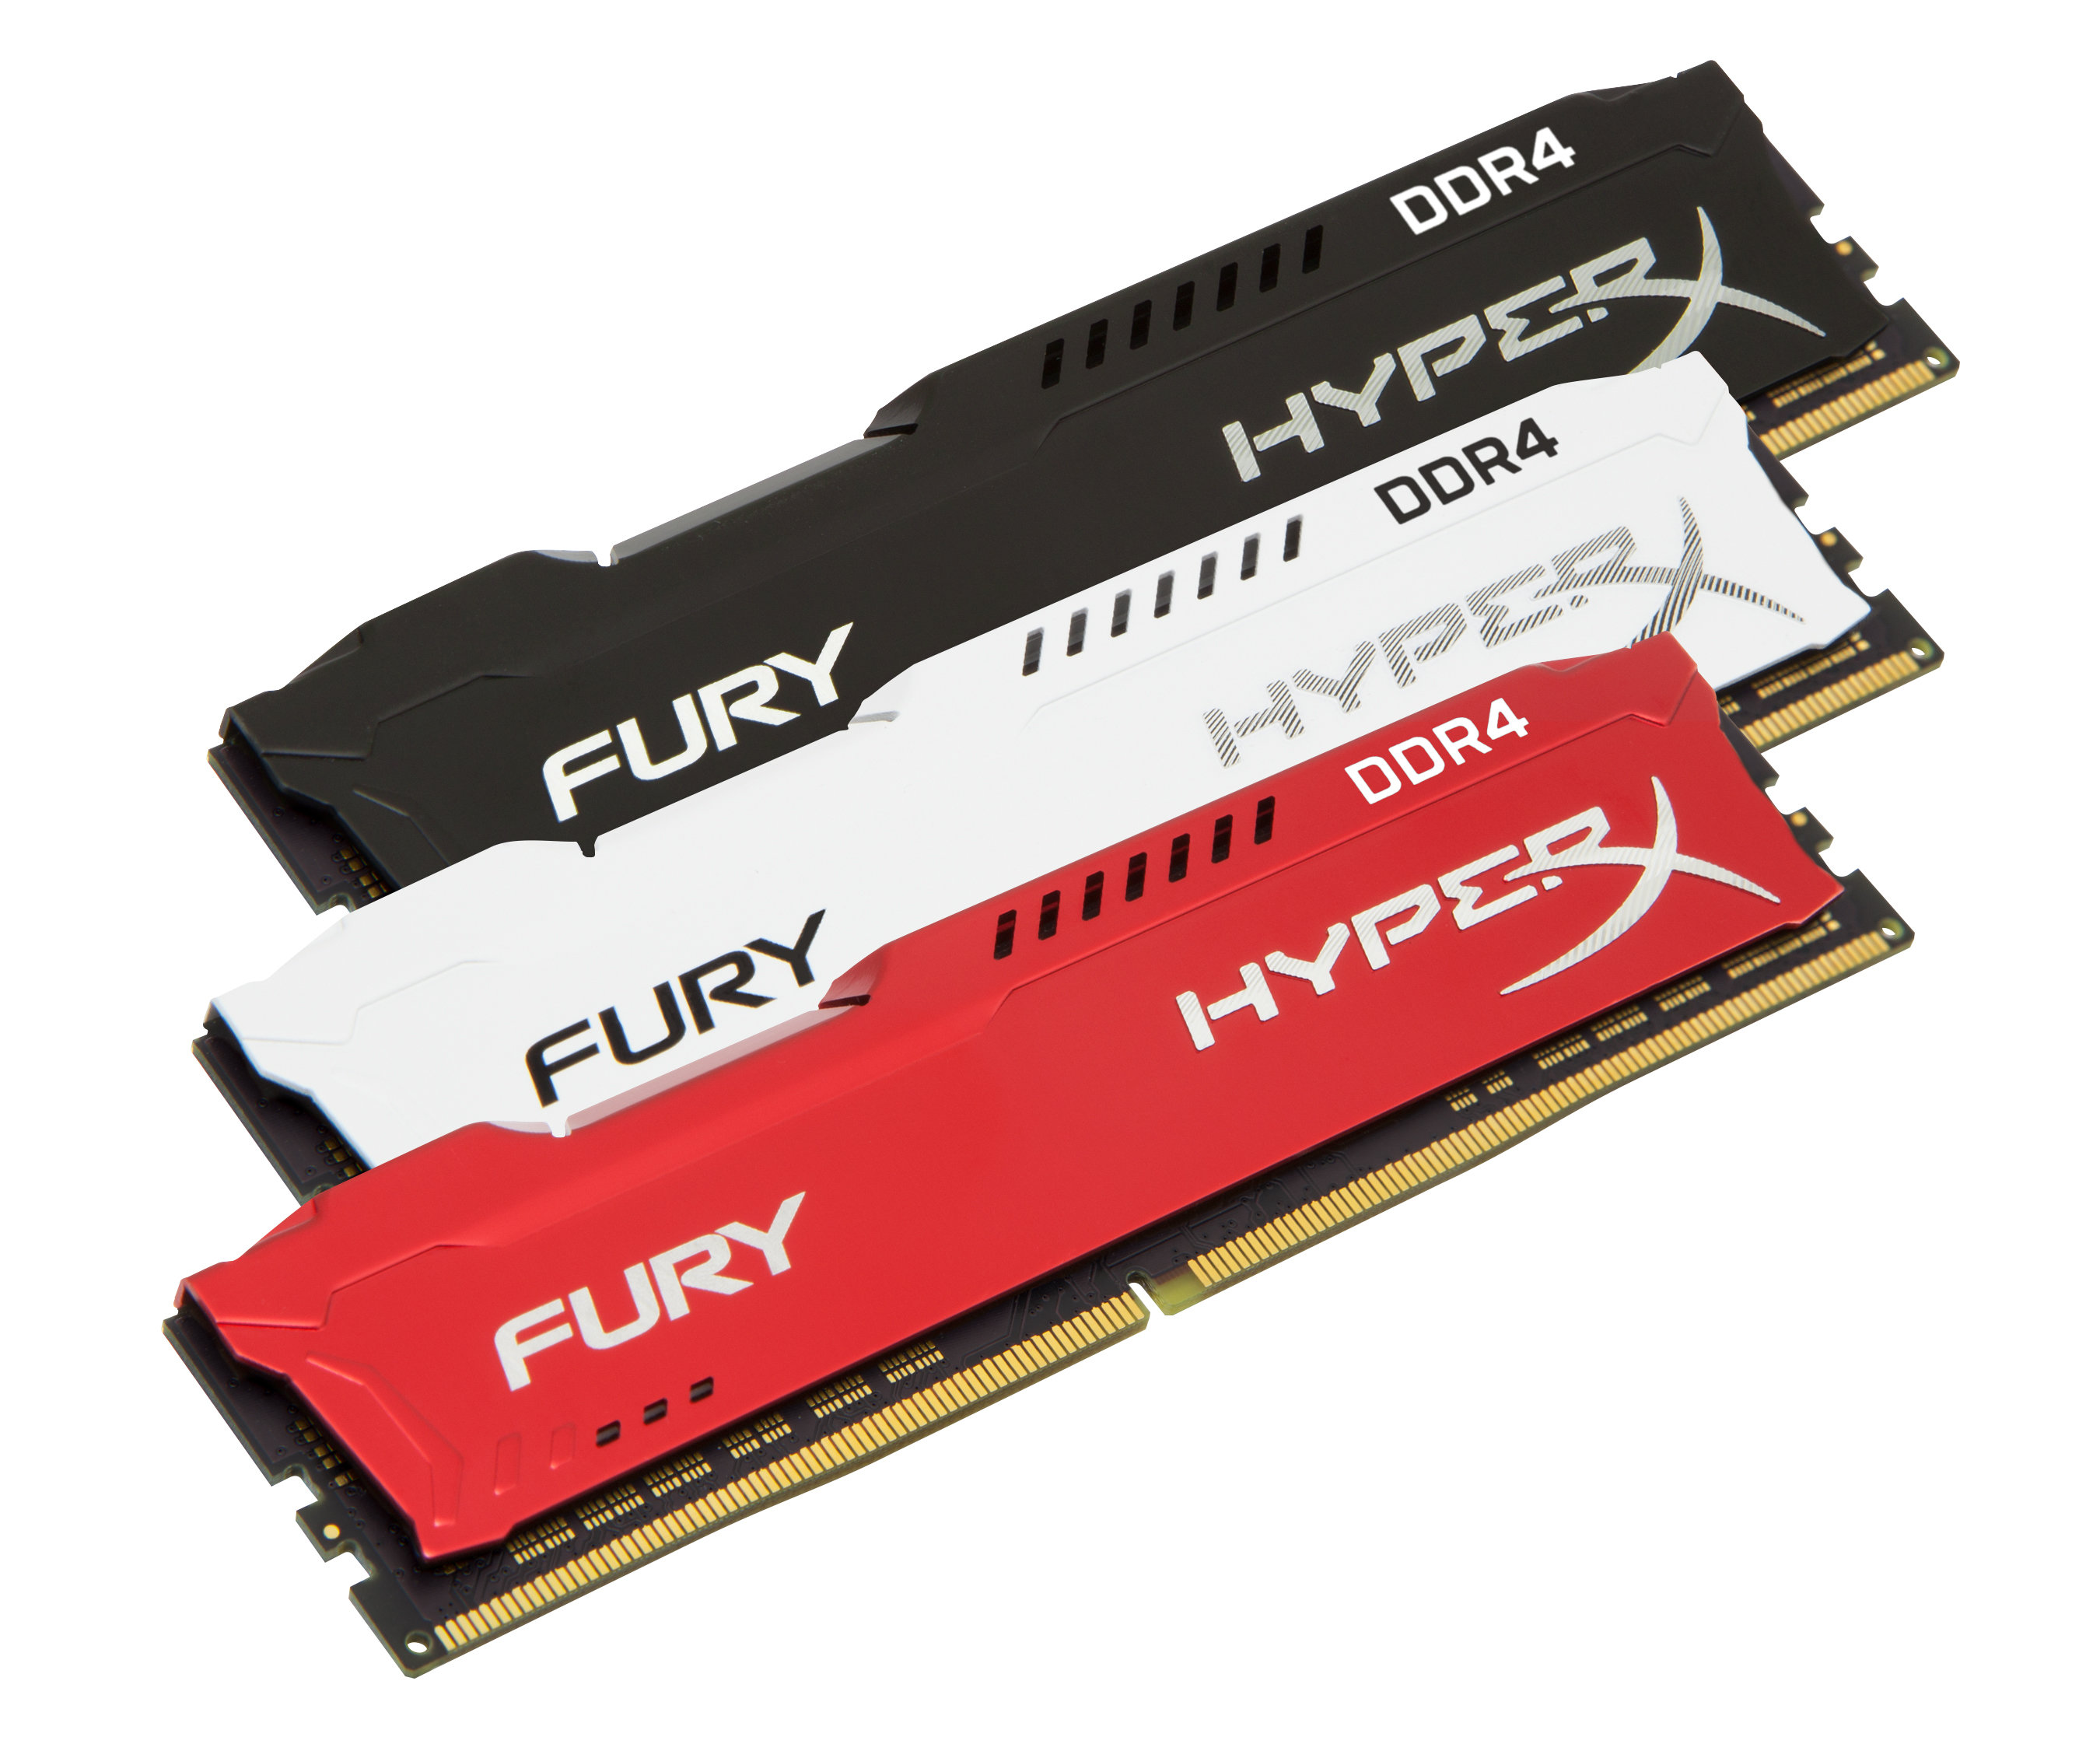 HyperX Expands FURY DDR4 and  Impact DDR4 Product Lines